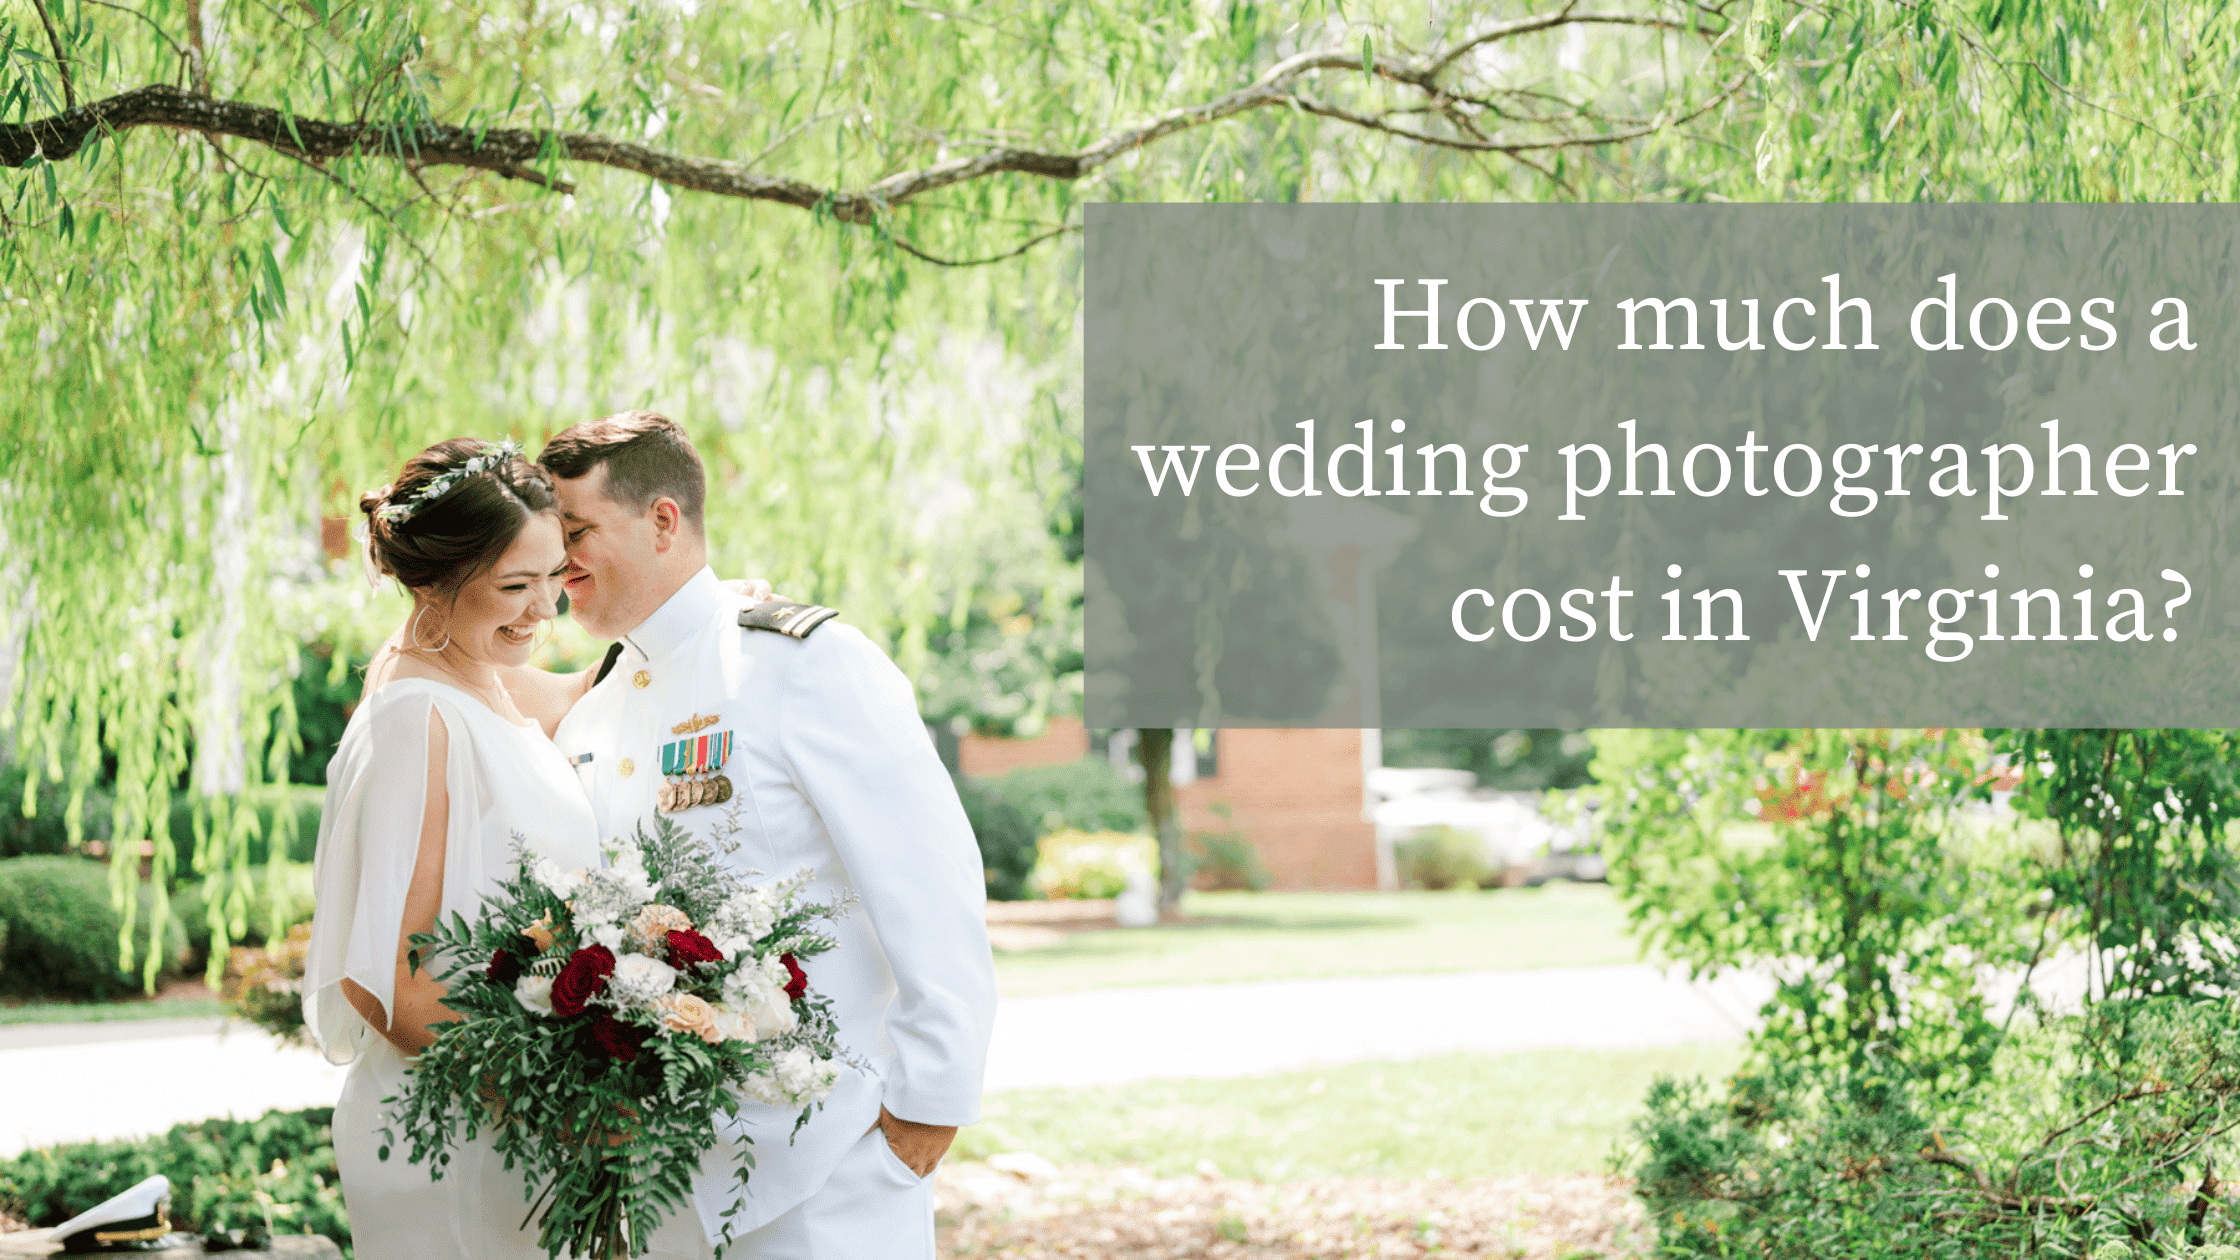 Wedding photography of a bride and groom under a willow tree snuggling together with text overlay that reads: "How much does a wedding photographer cost in Virginia"